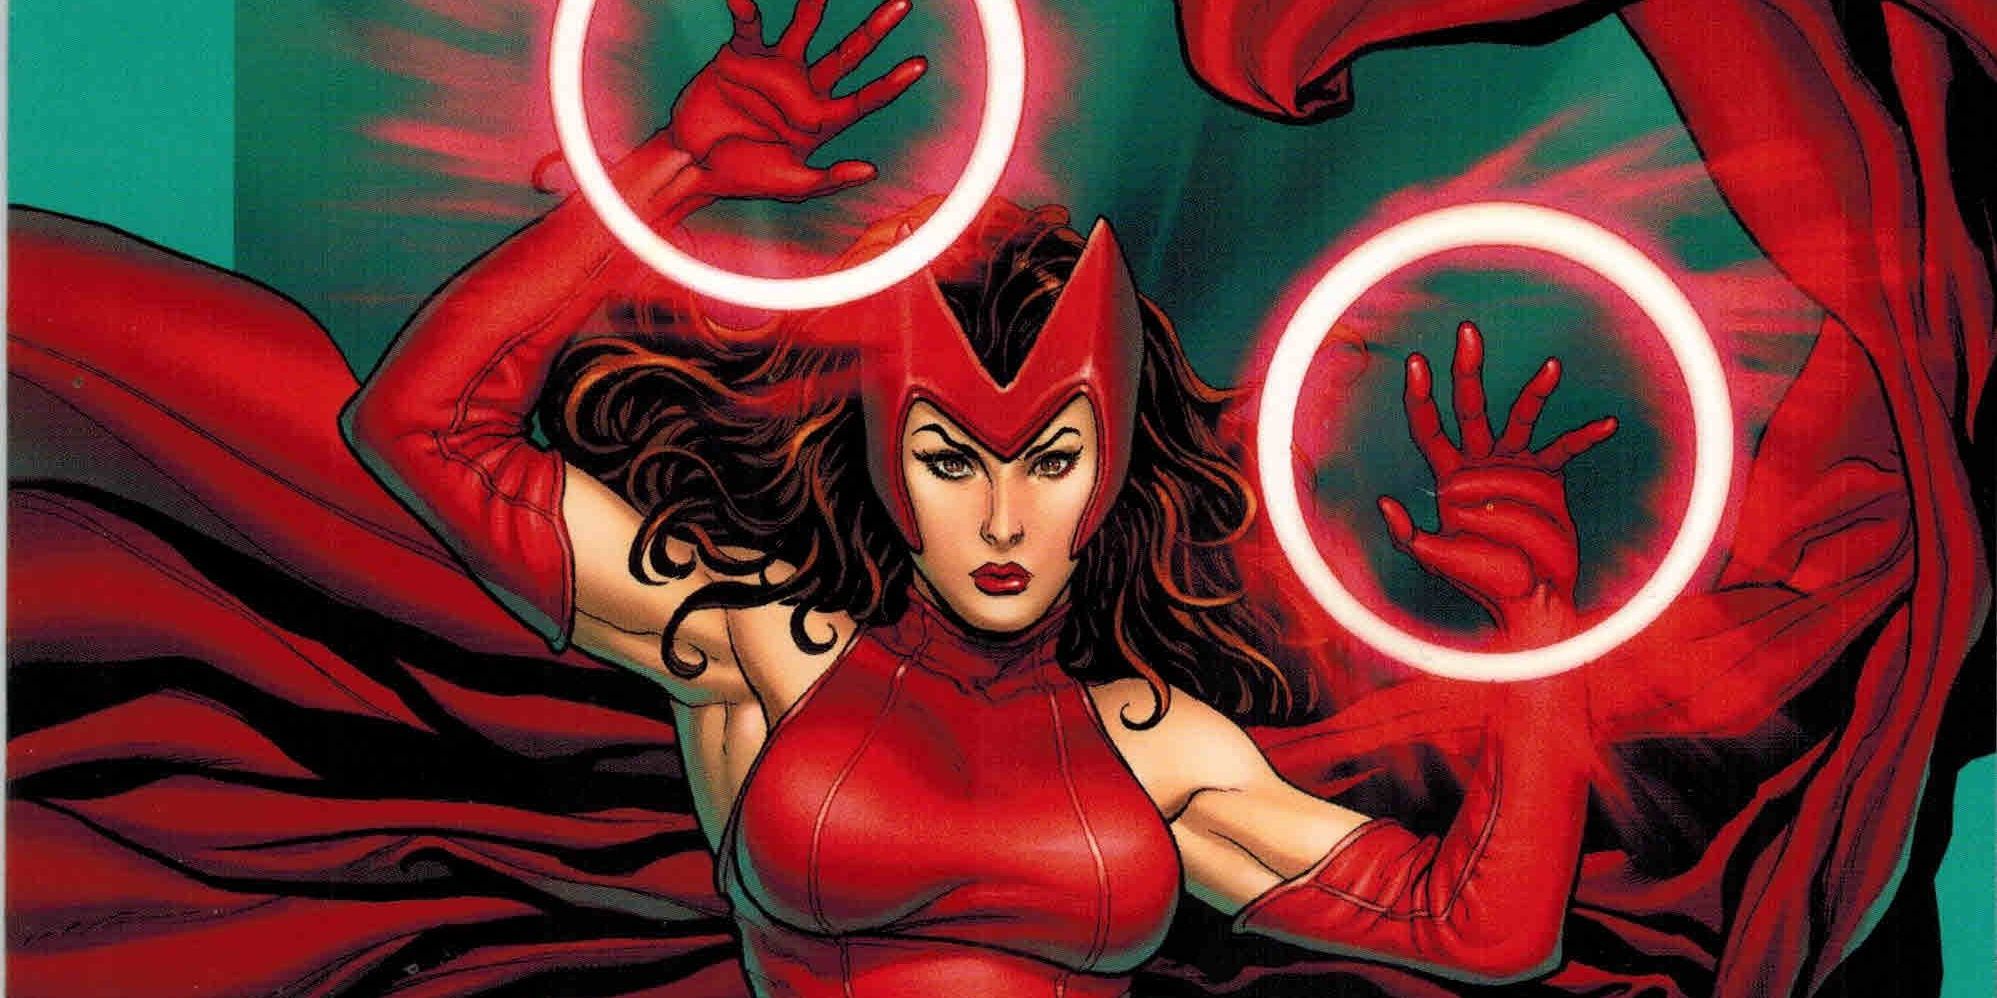 Marvel Comics' Scarlet Witch using her powers